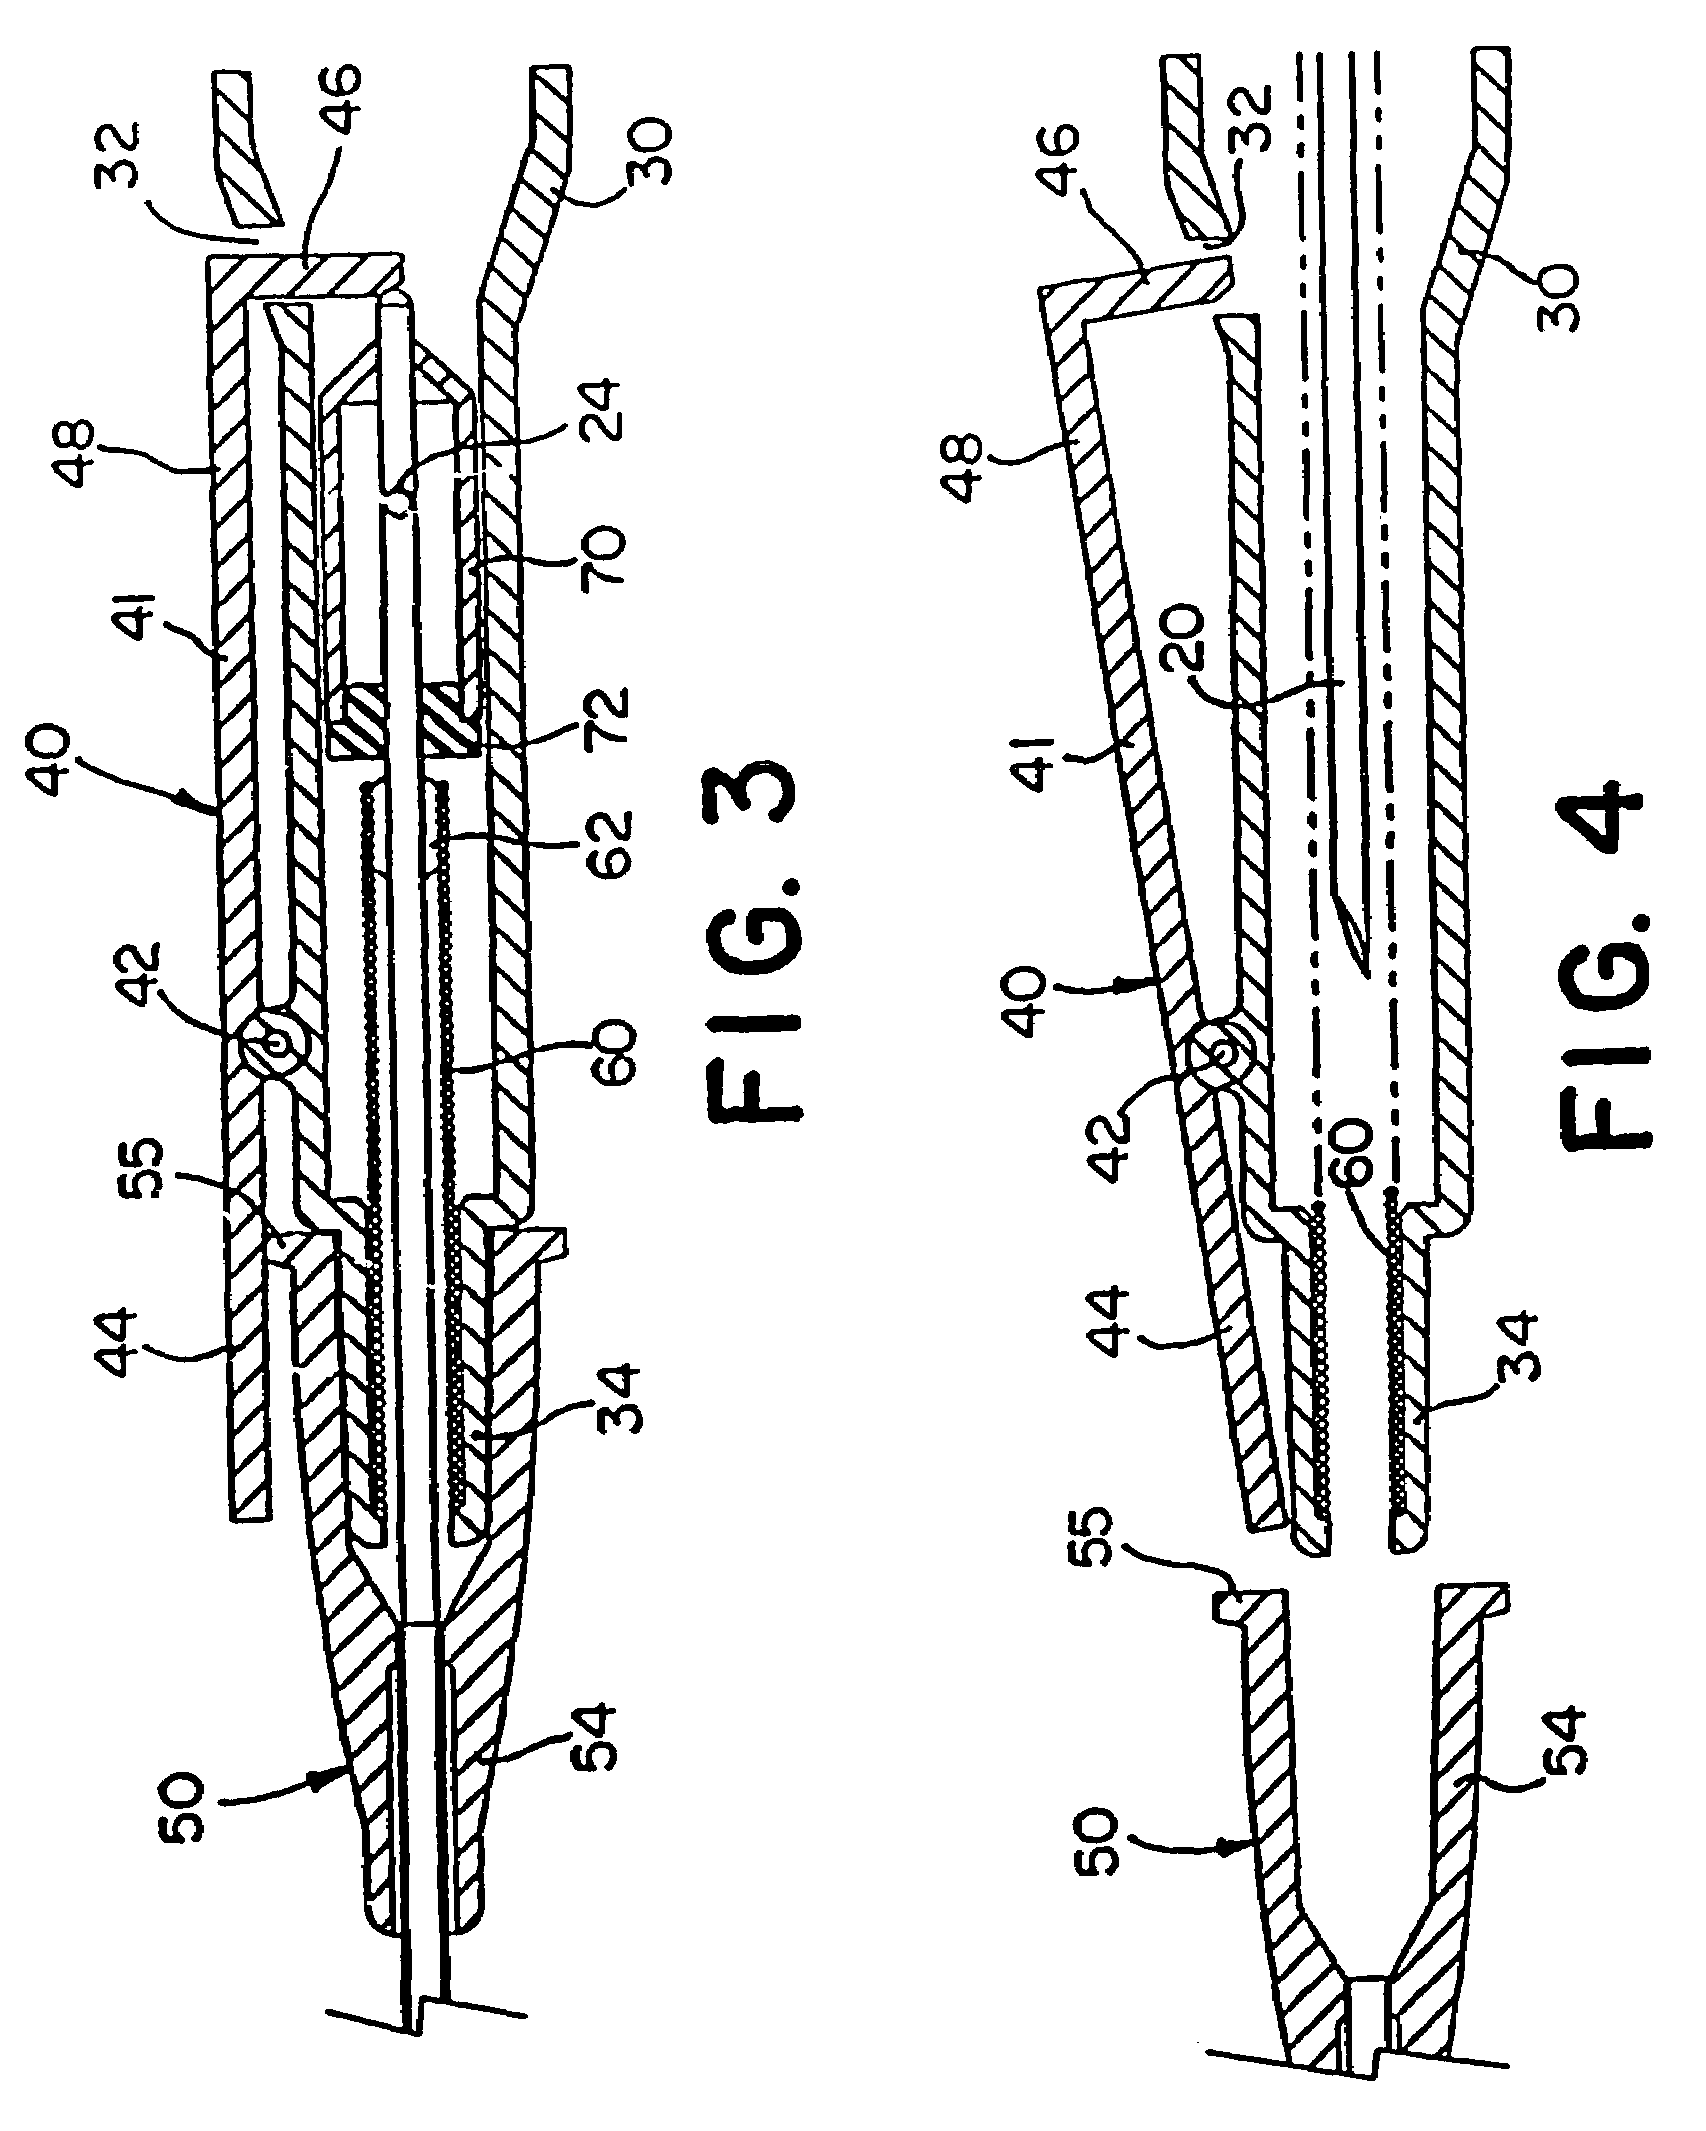 Catheter insertion device with retractable needle